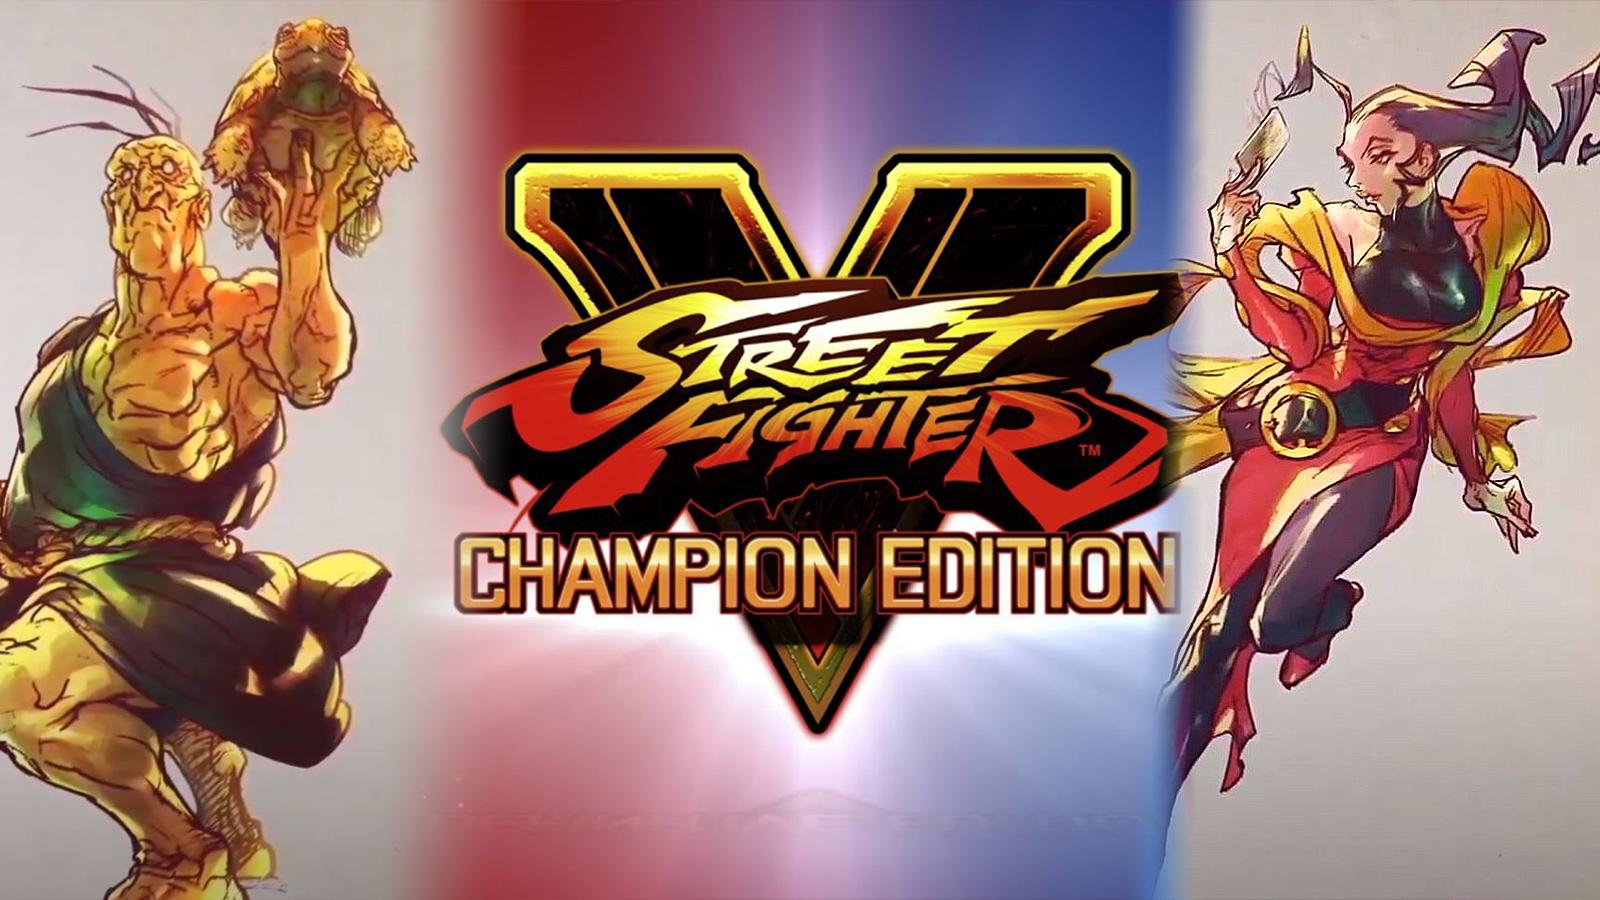 Street Fighter V: Champion Edition logo surrounded by Oro's SFV art and Rose's SFV art.